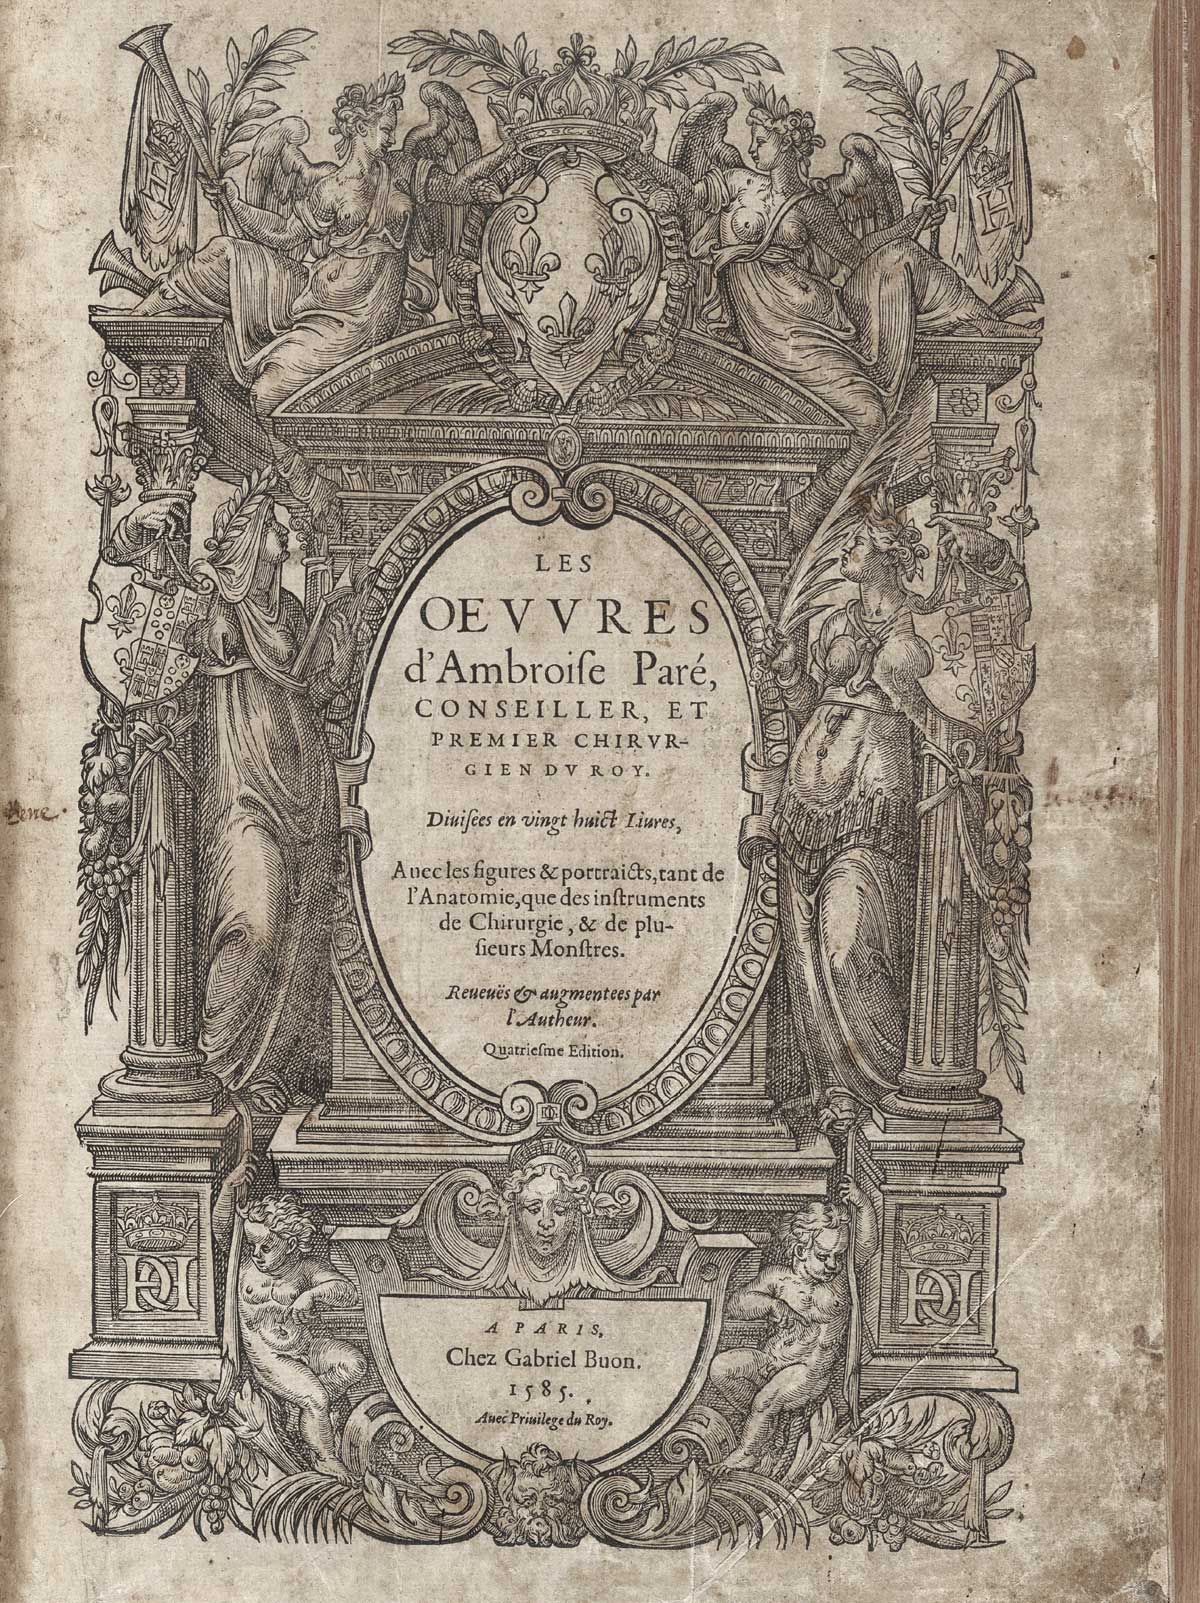 The title page of Ambroise Pare's Oeuvres